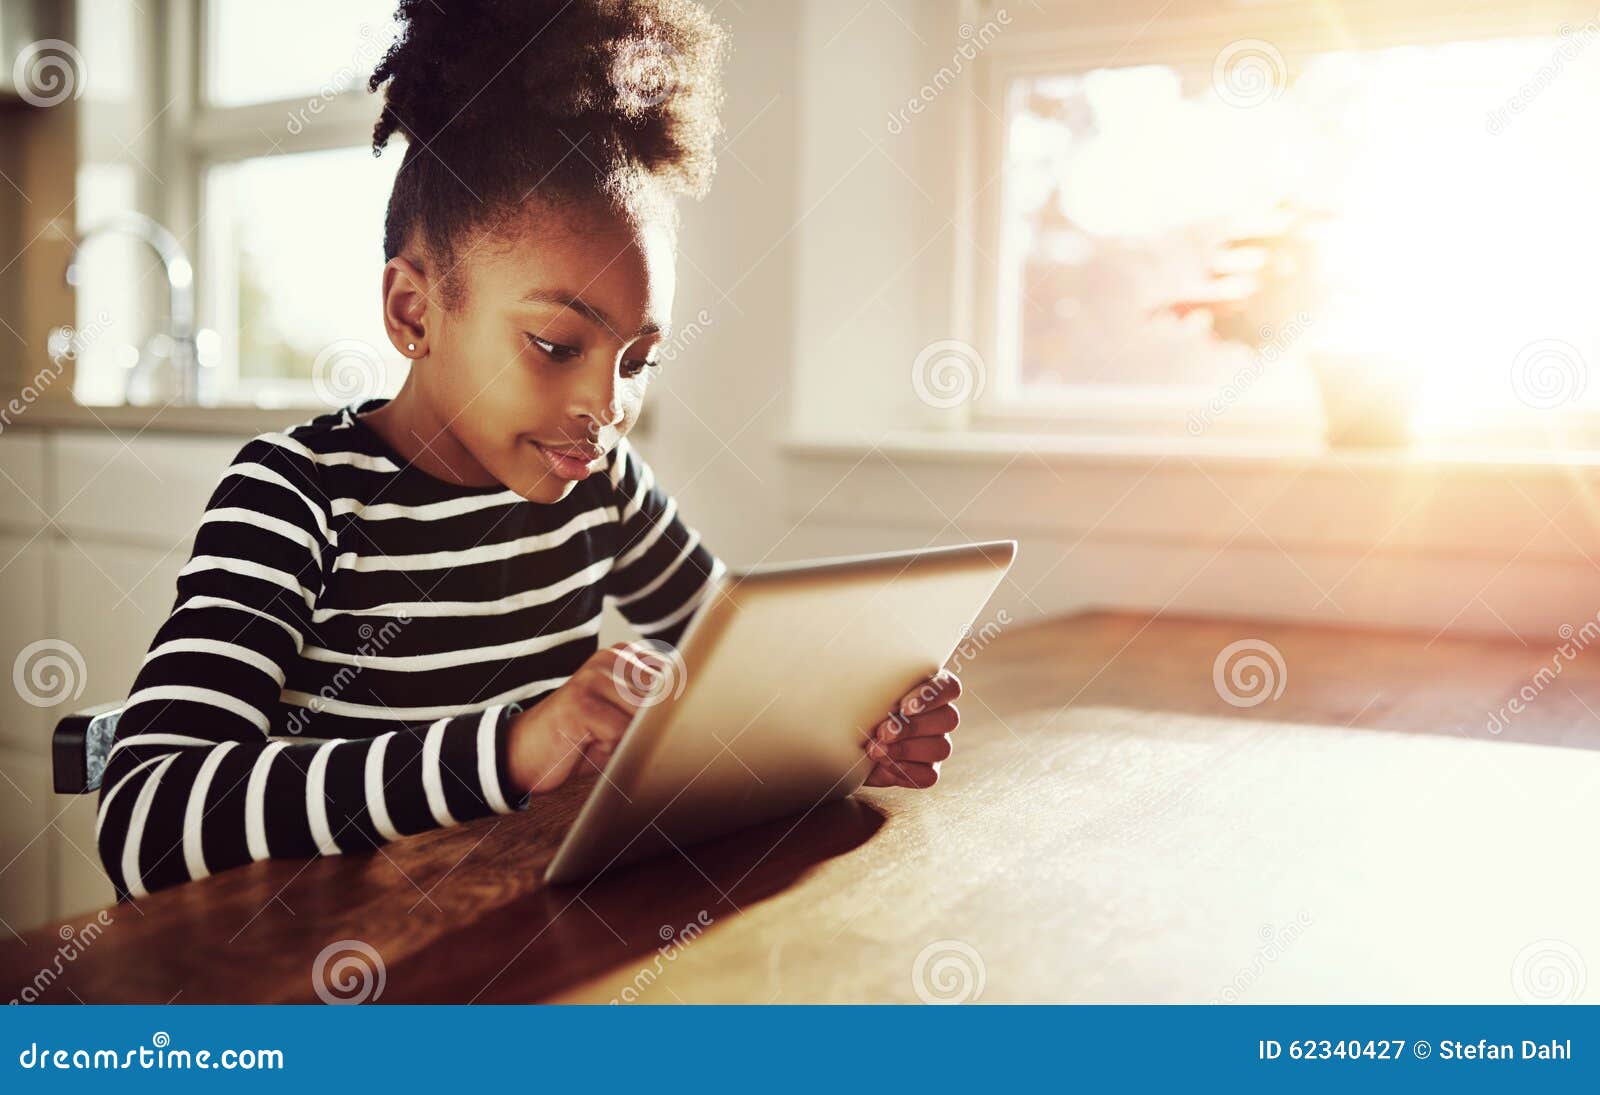 young black girl browsing on a tablet-pc